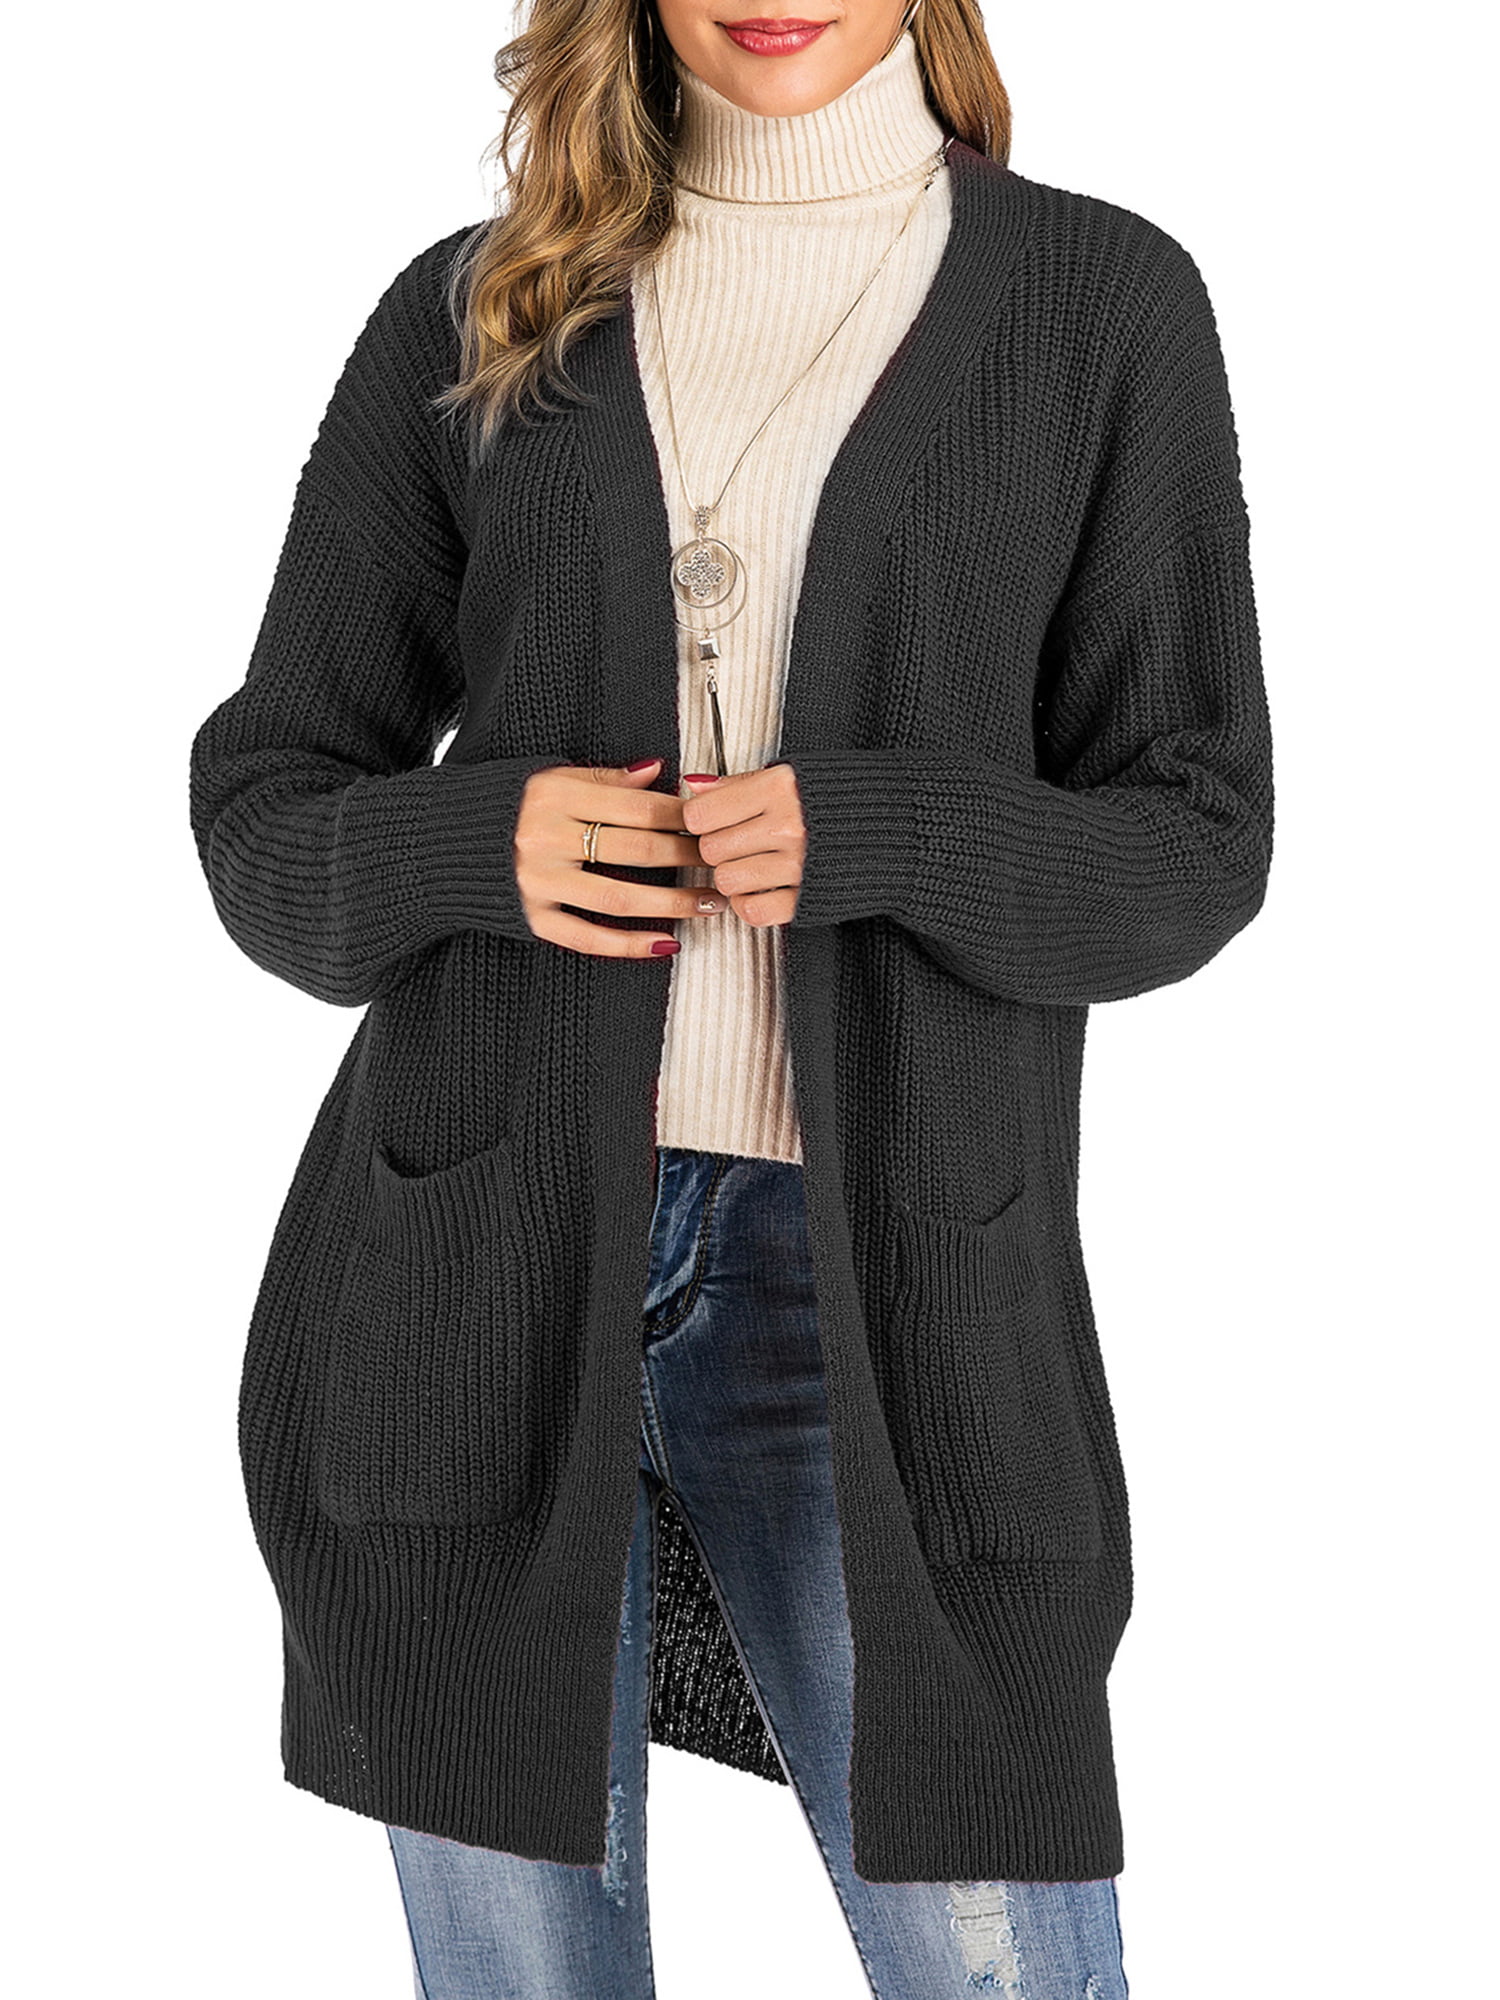 Cardigans for Women,Women's Plus Size Cardigan Sweaters Open Front Chunky Knit Cardigan Lightweight Long Duster Cardigan 